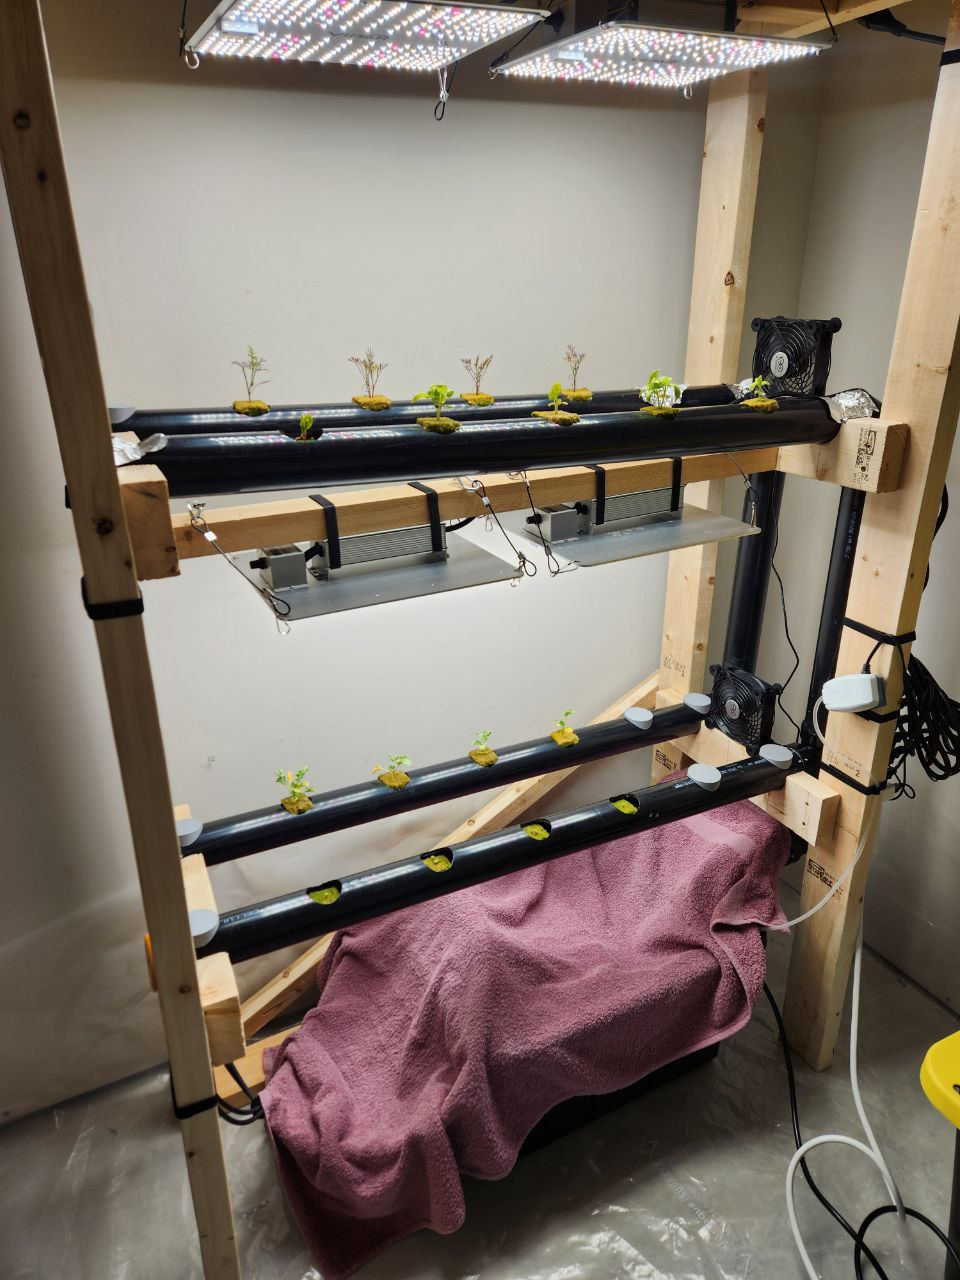 four black pipes supported horizontally by a wooden frame. eight small seedlings are growing out of the pipe under four grow lights total. two fans on the right. a pink towel is down below, covering the reservoir.